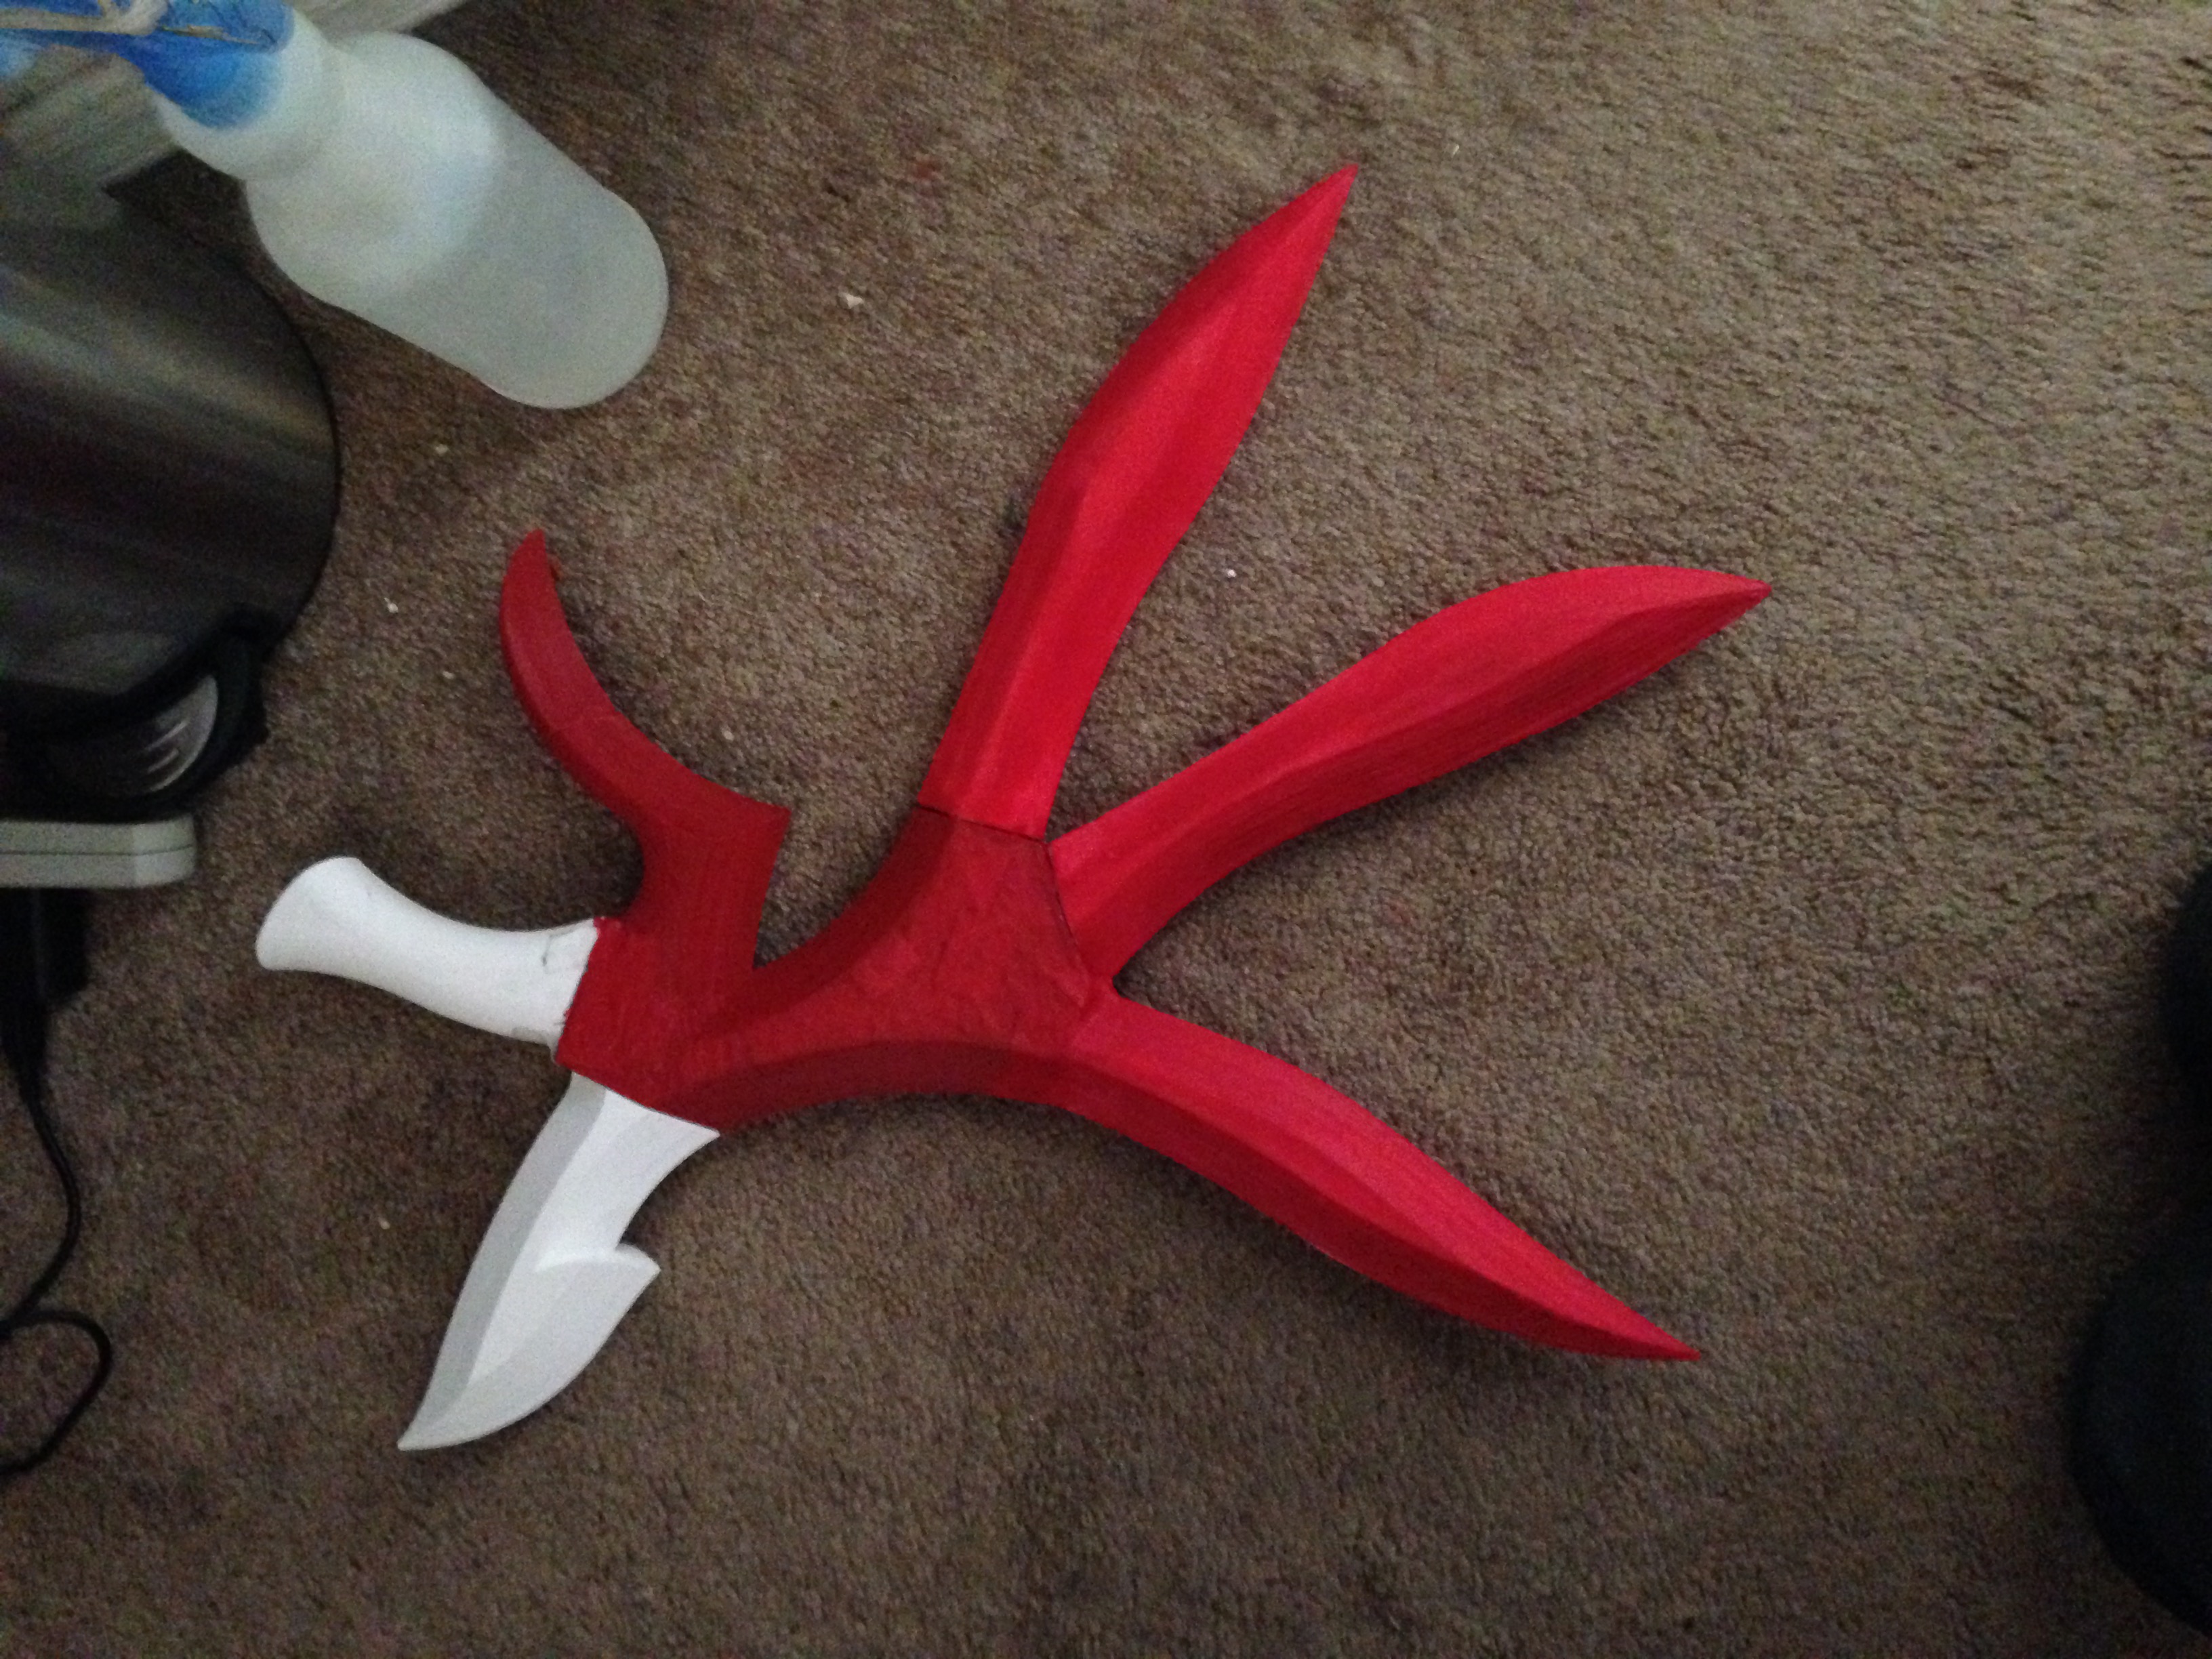 $5.00Avengers other weapon from the anime Fate stay/night